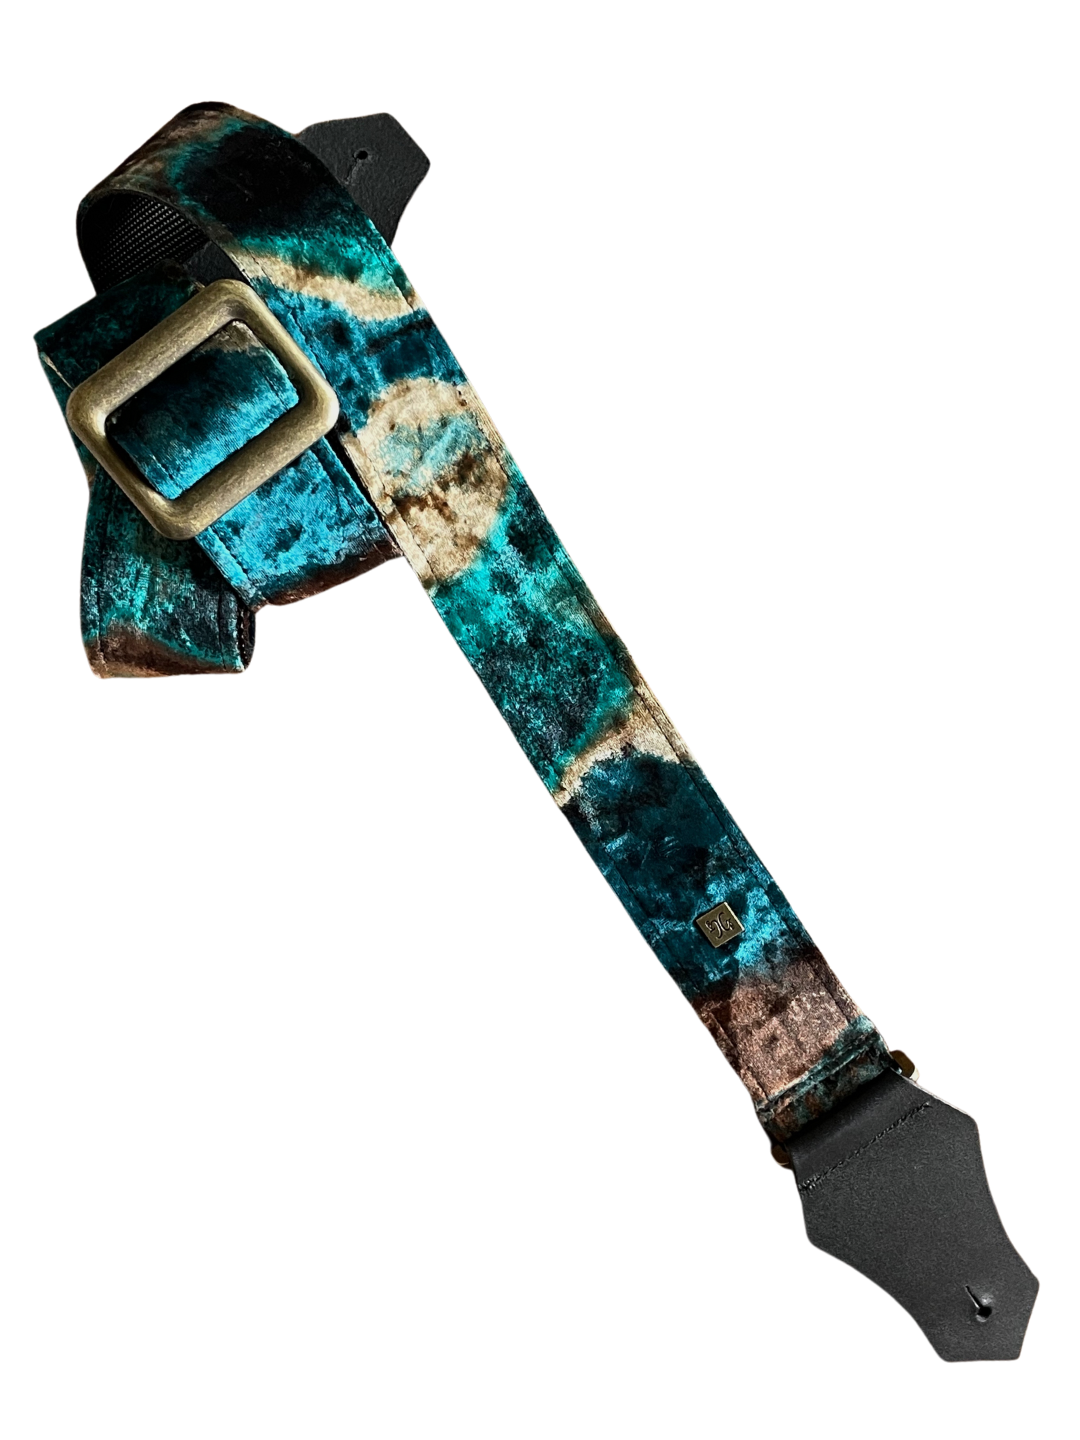 The JD Teal 2" Guitar Strap